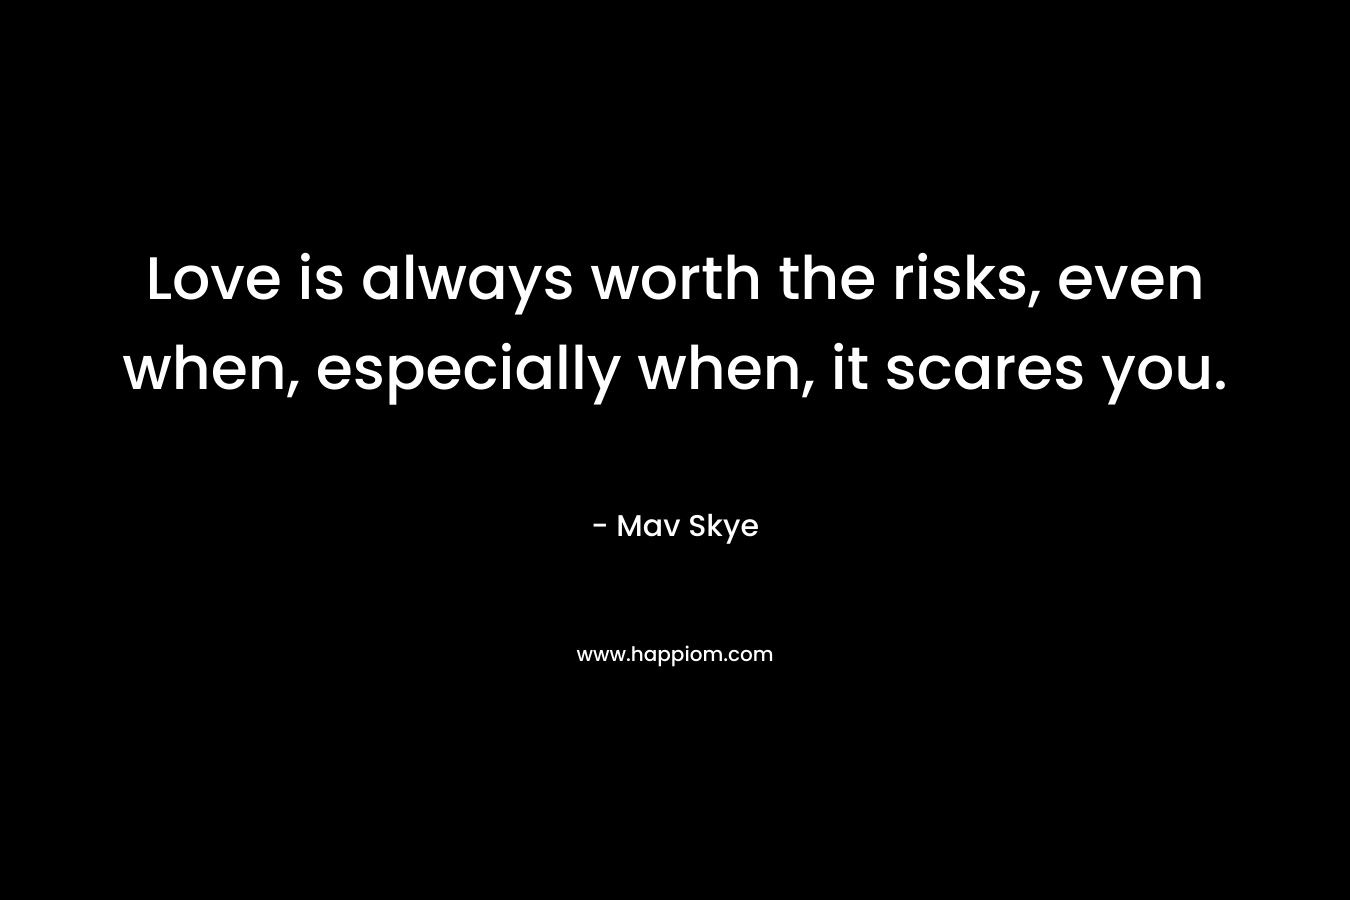 Love is always worth the risks, even when, especially when, it scares you. – Mav Skye